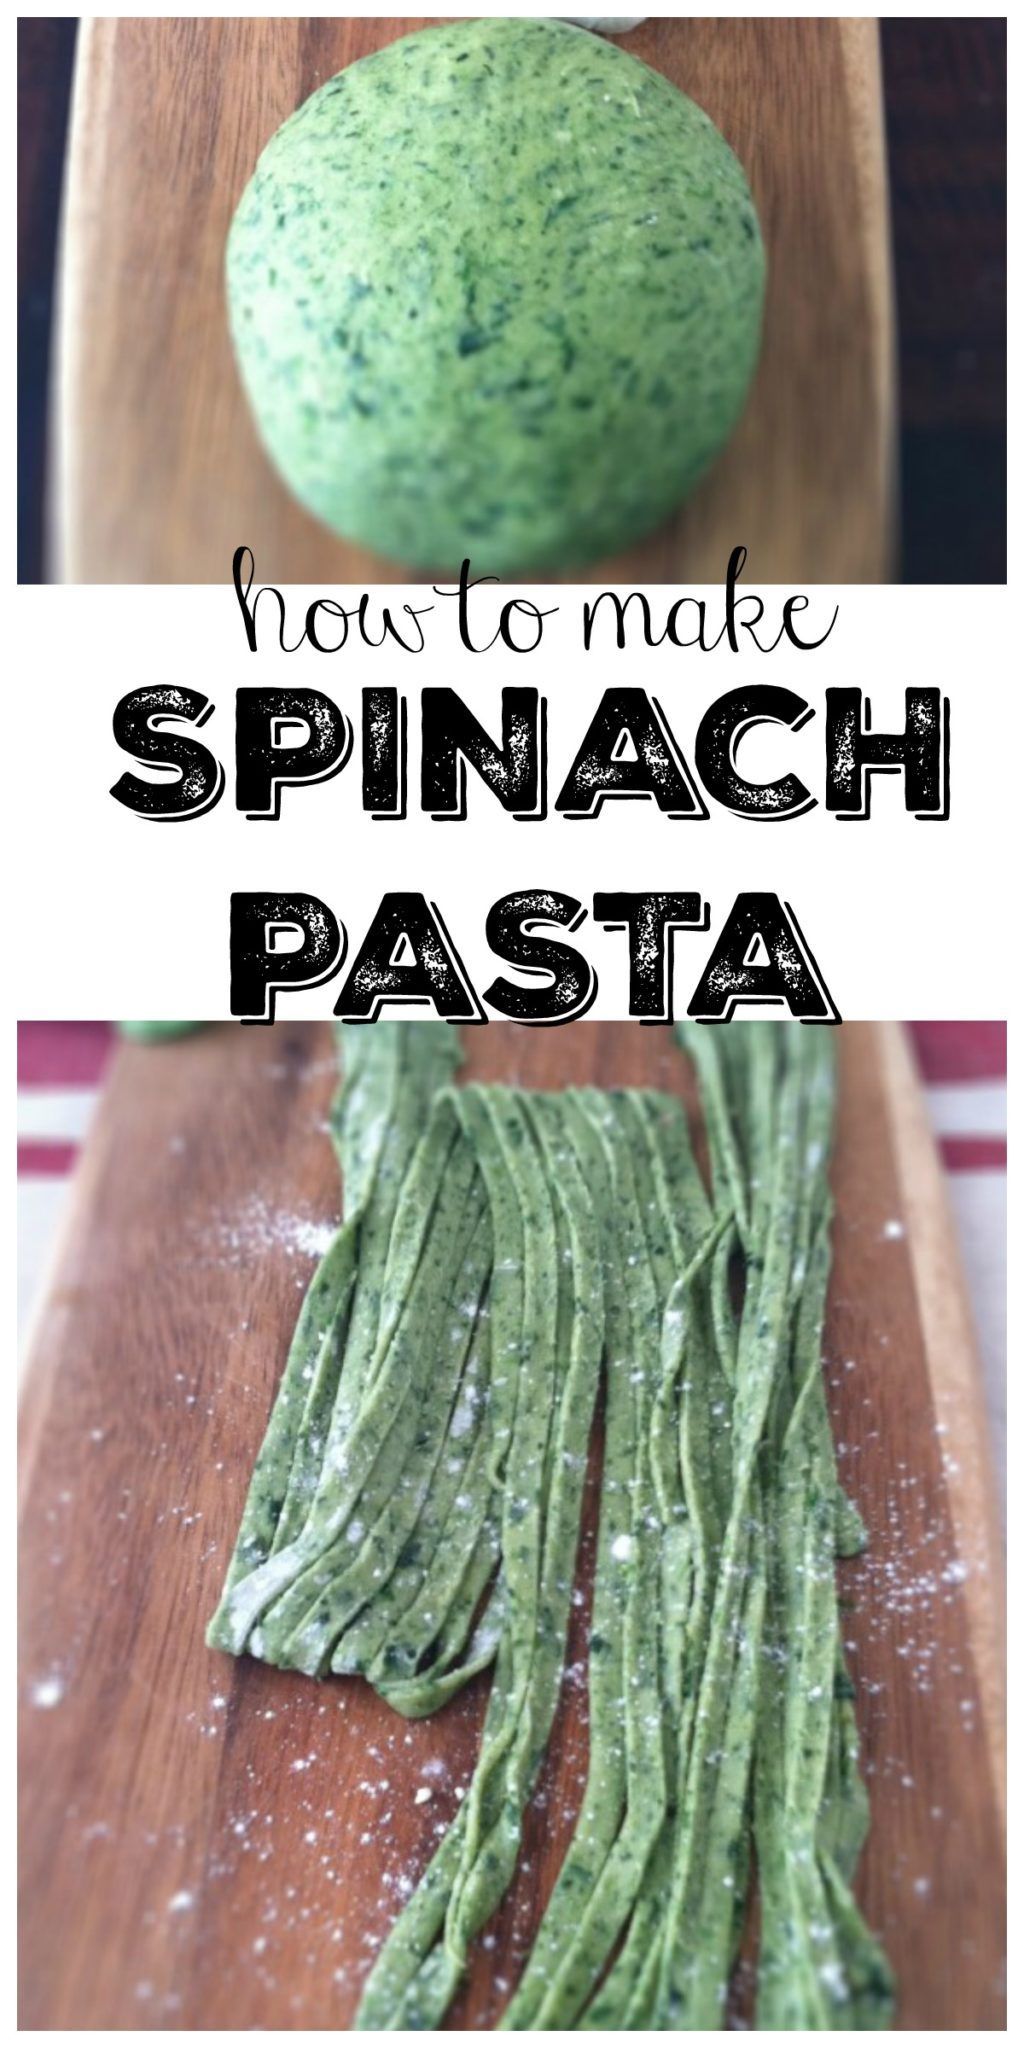 How to Make Spinach Pasta -   11 spinach recipes noodles
 ideas